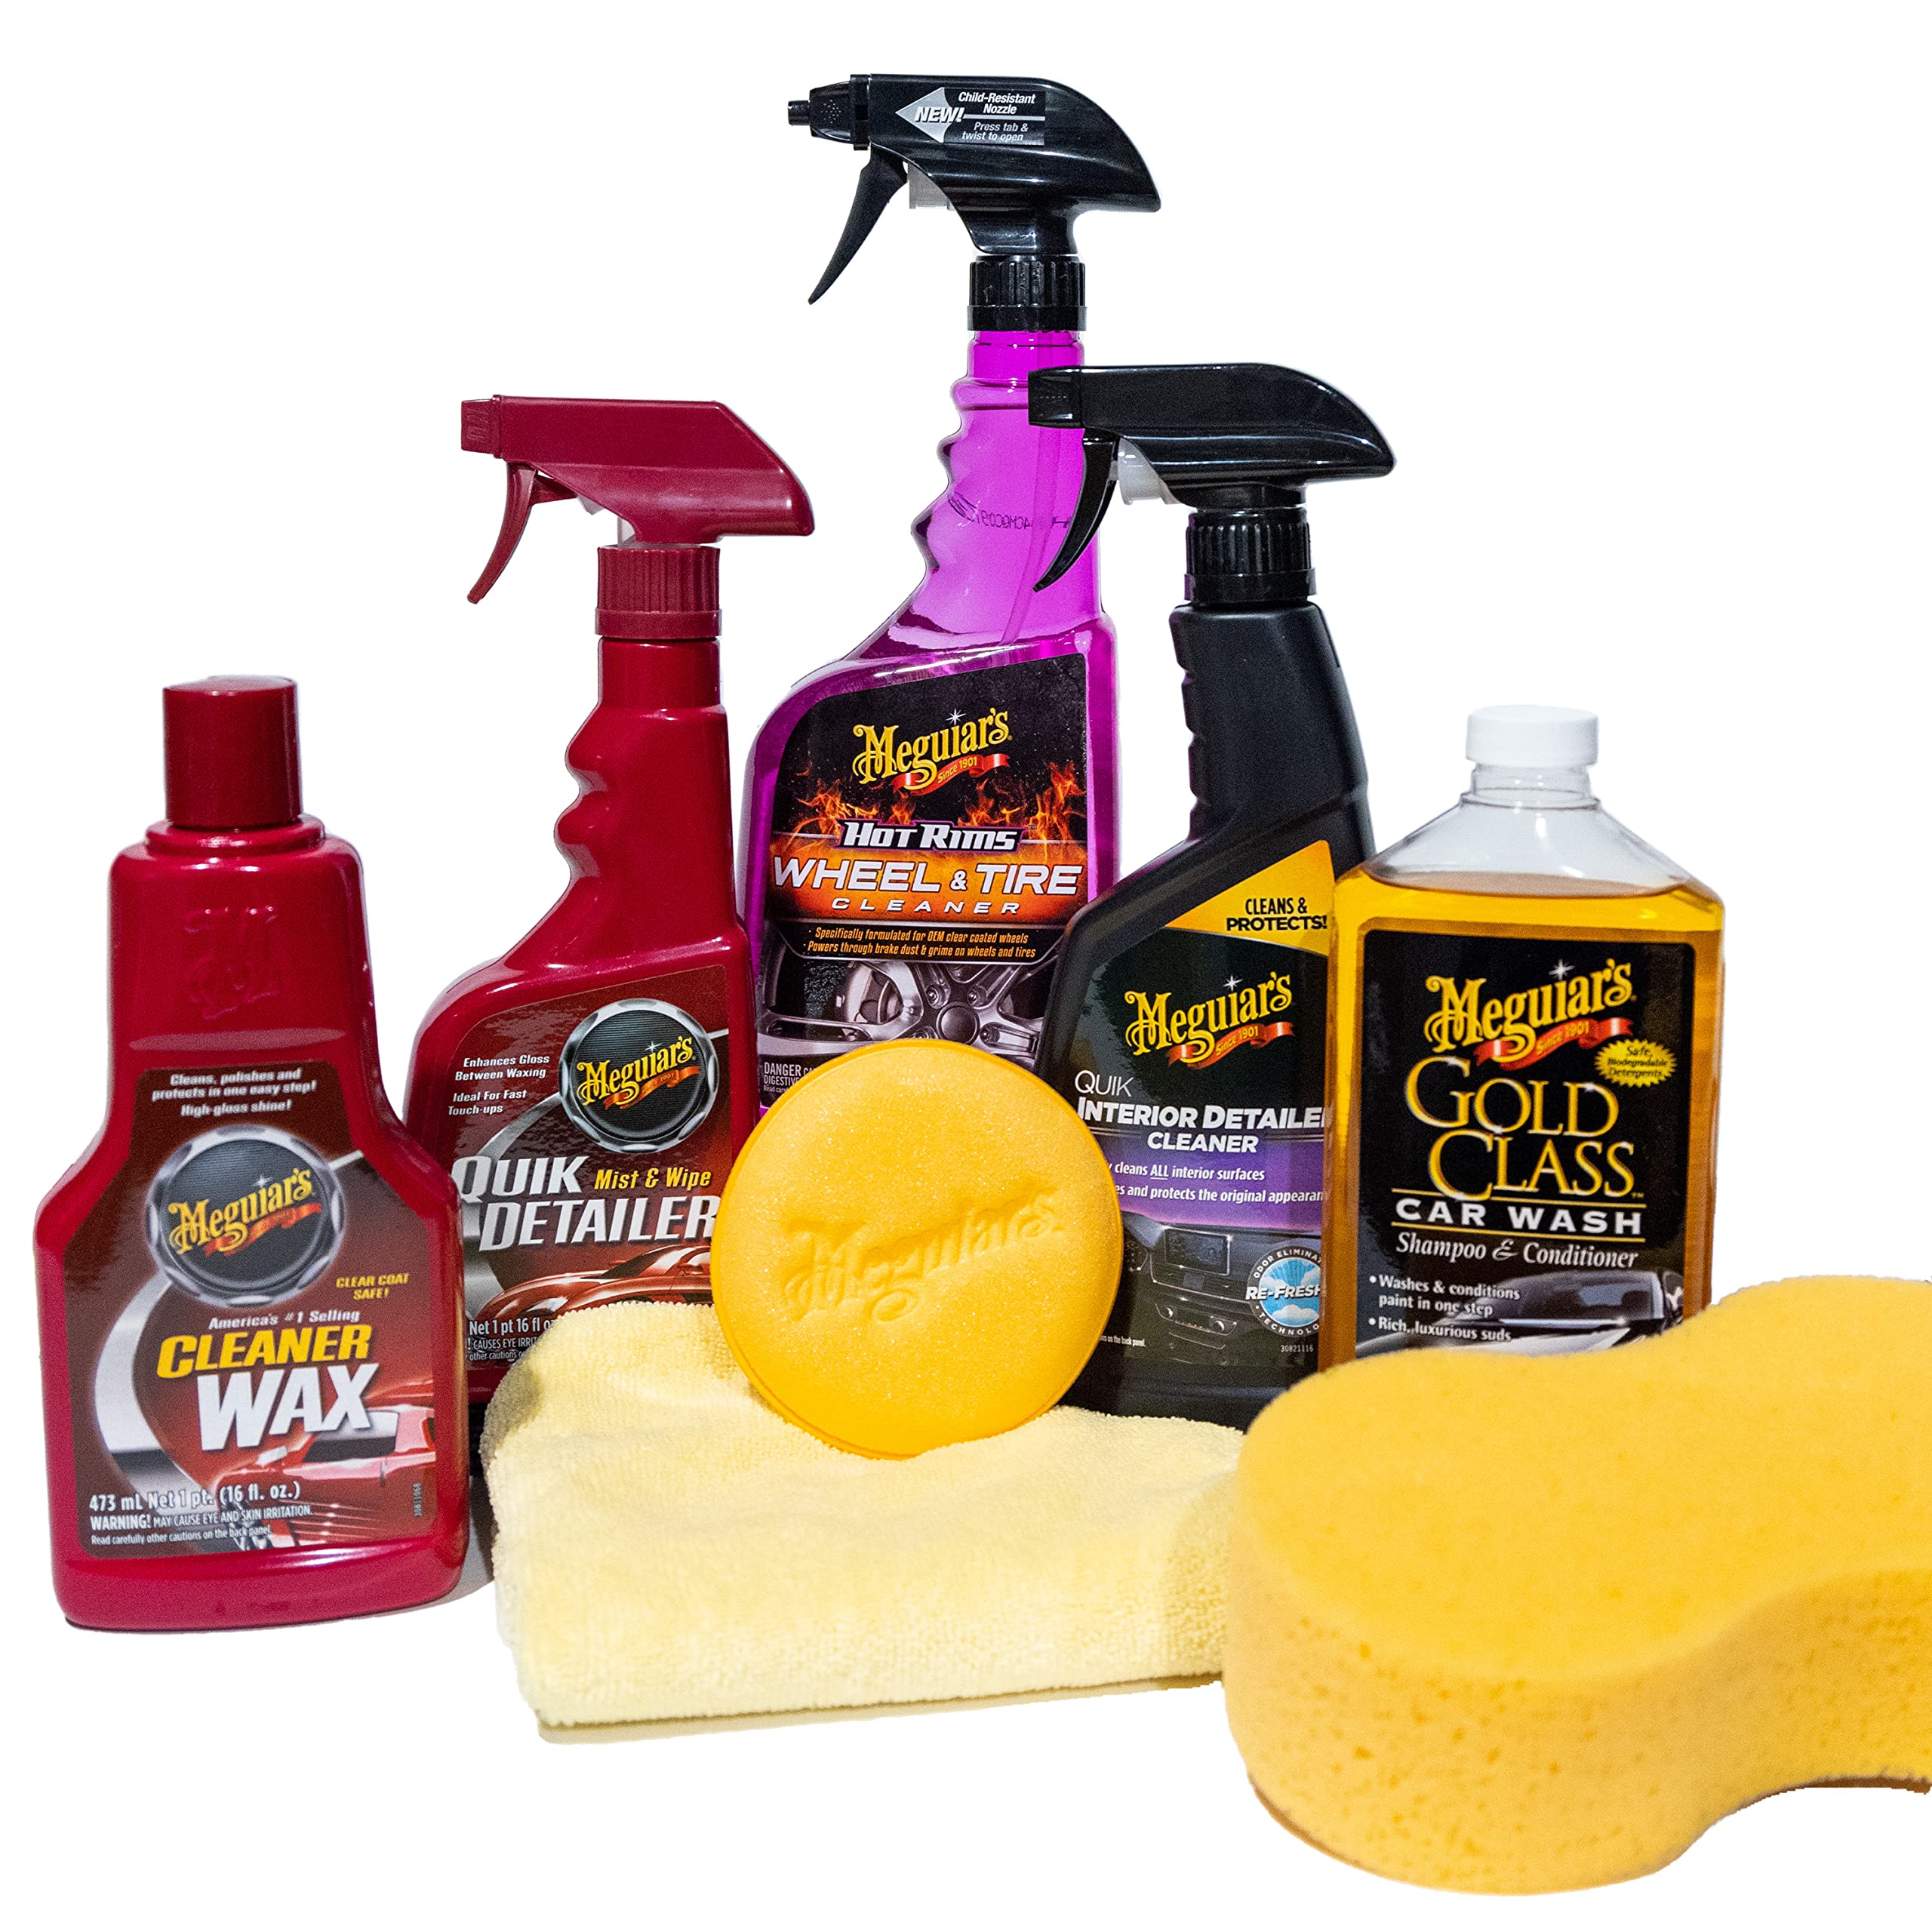 Book Cover Meguiar's Classic Wash & Wax Kit, Car Cleaning Kit with Car Wash Soap and Wax, Includes Other Car Cleaning Products Like Detail Spray, Interior Cleaner, Tire Cleaner, and More